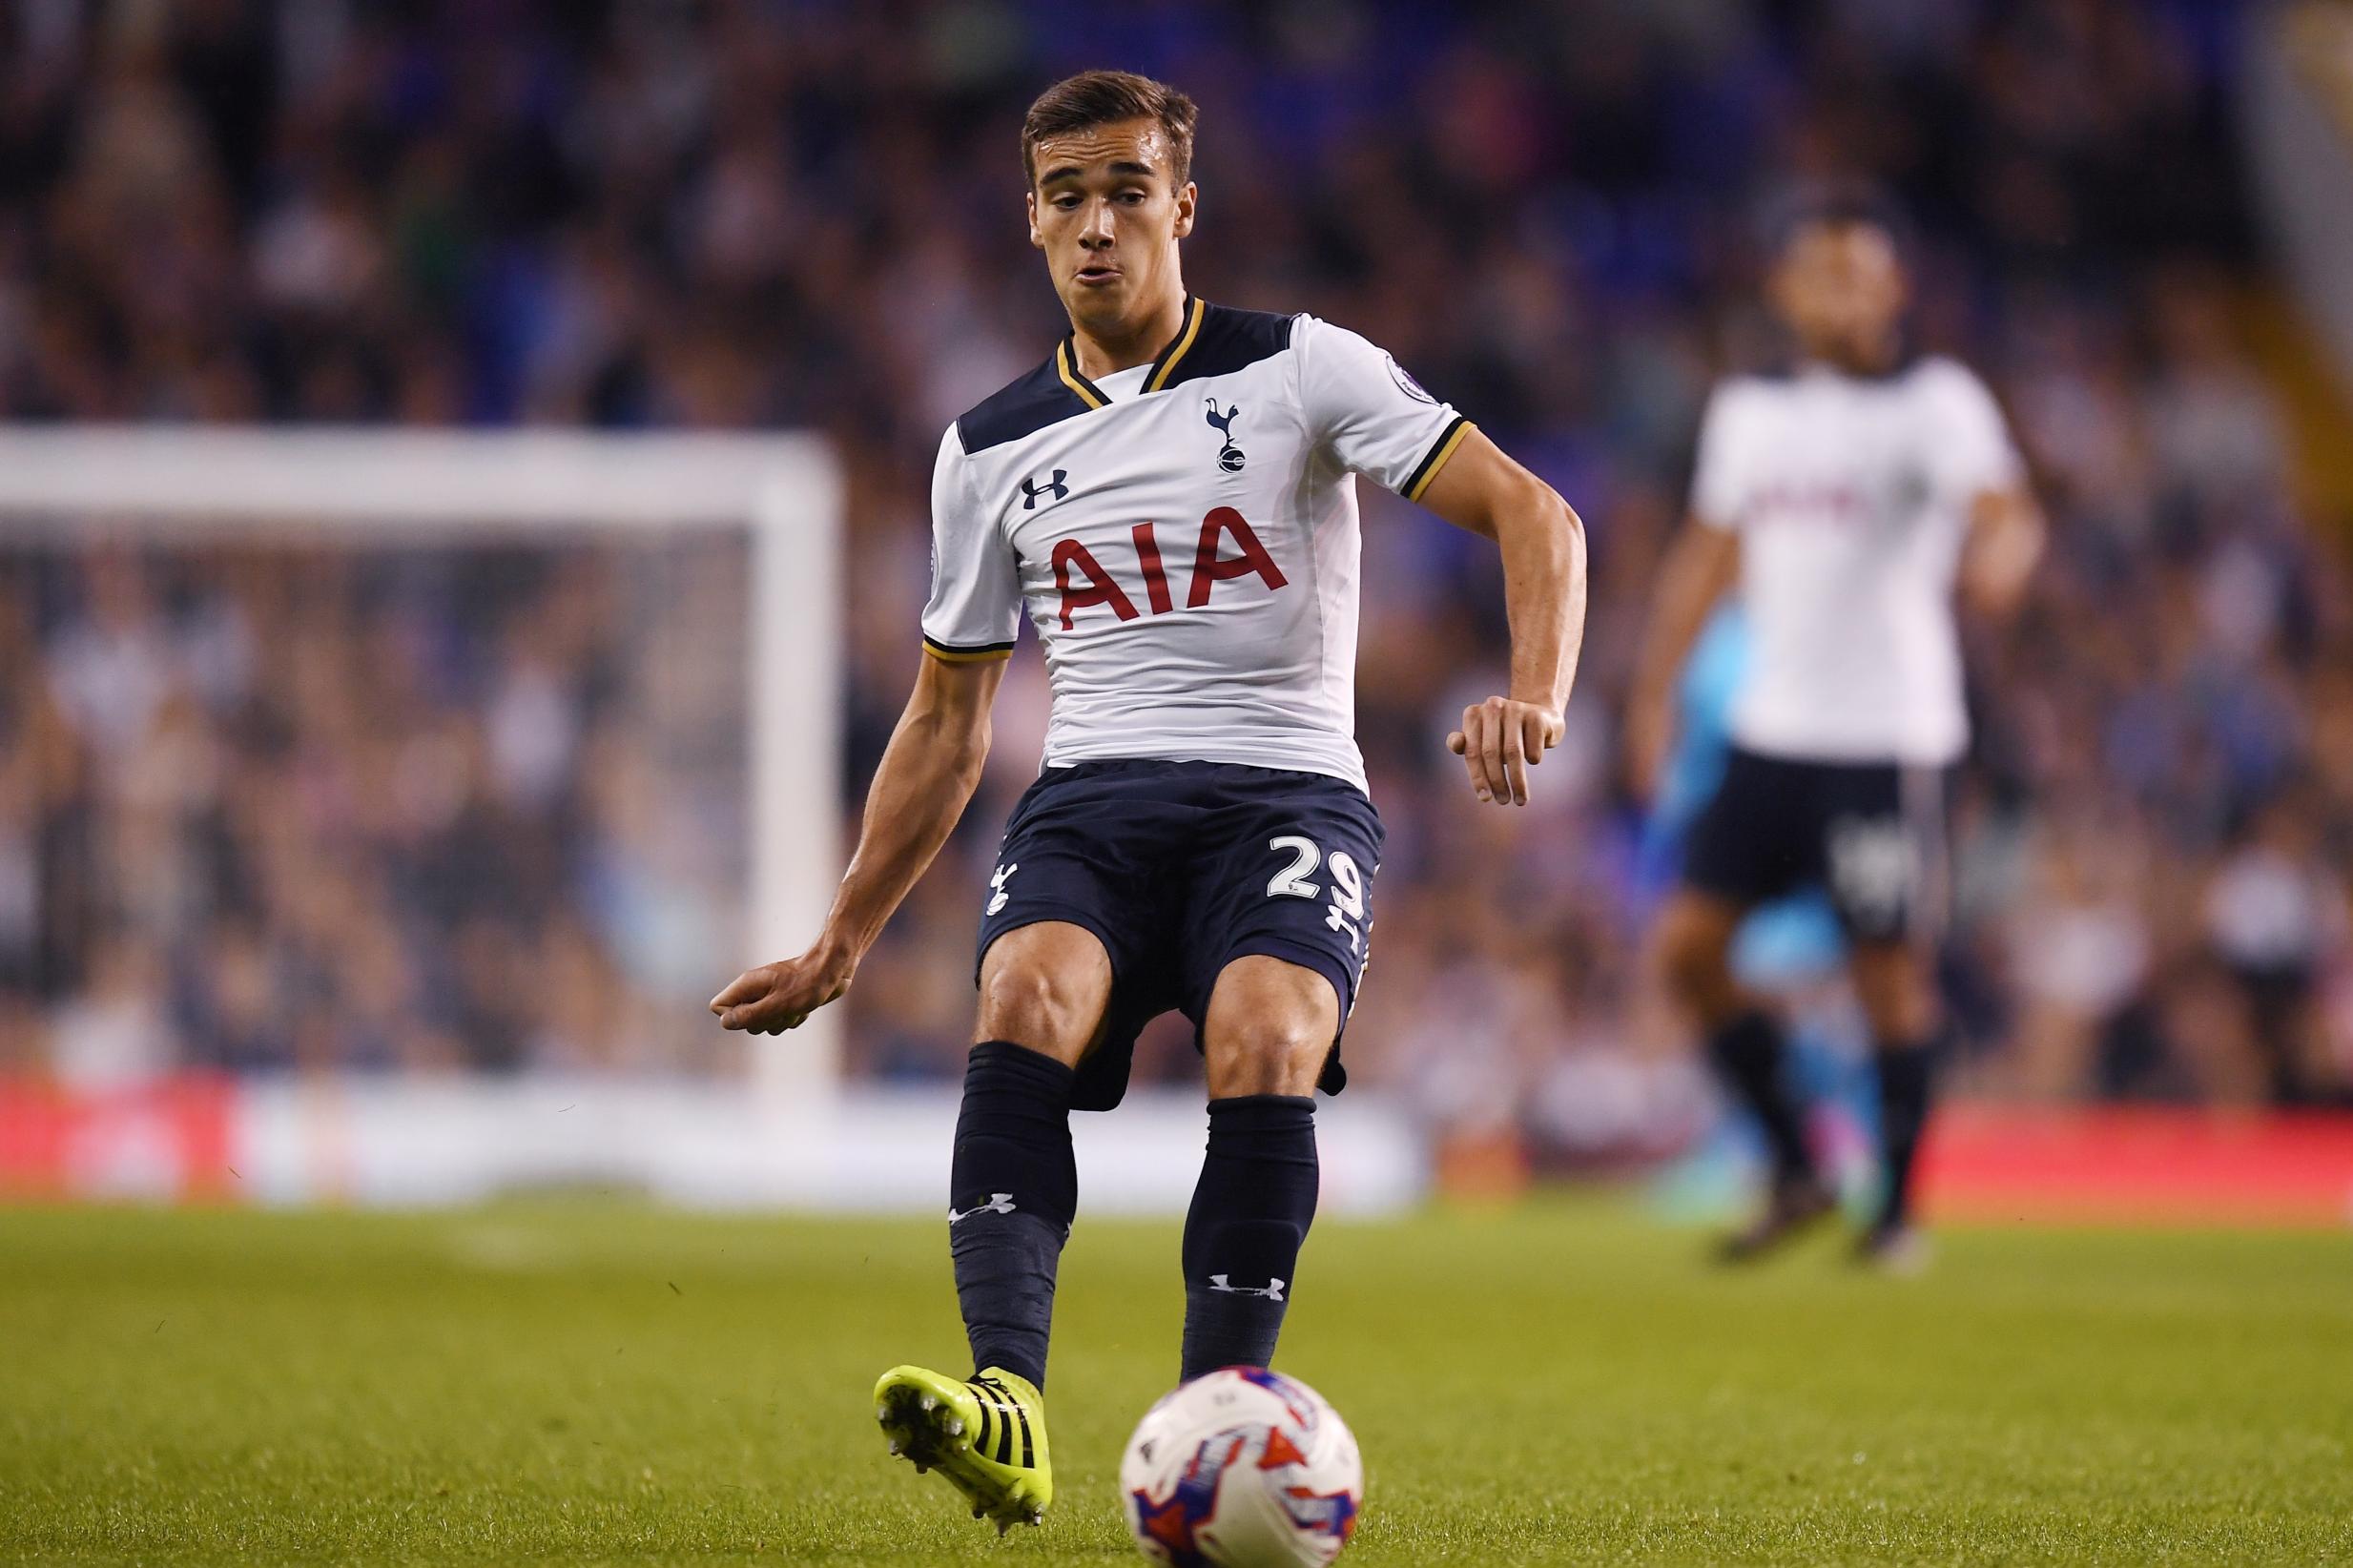 Harry Winks will develop into a superstar in the future.